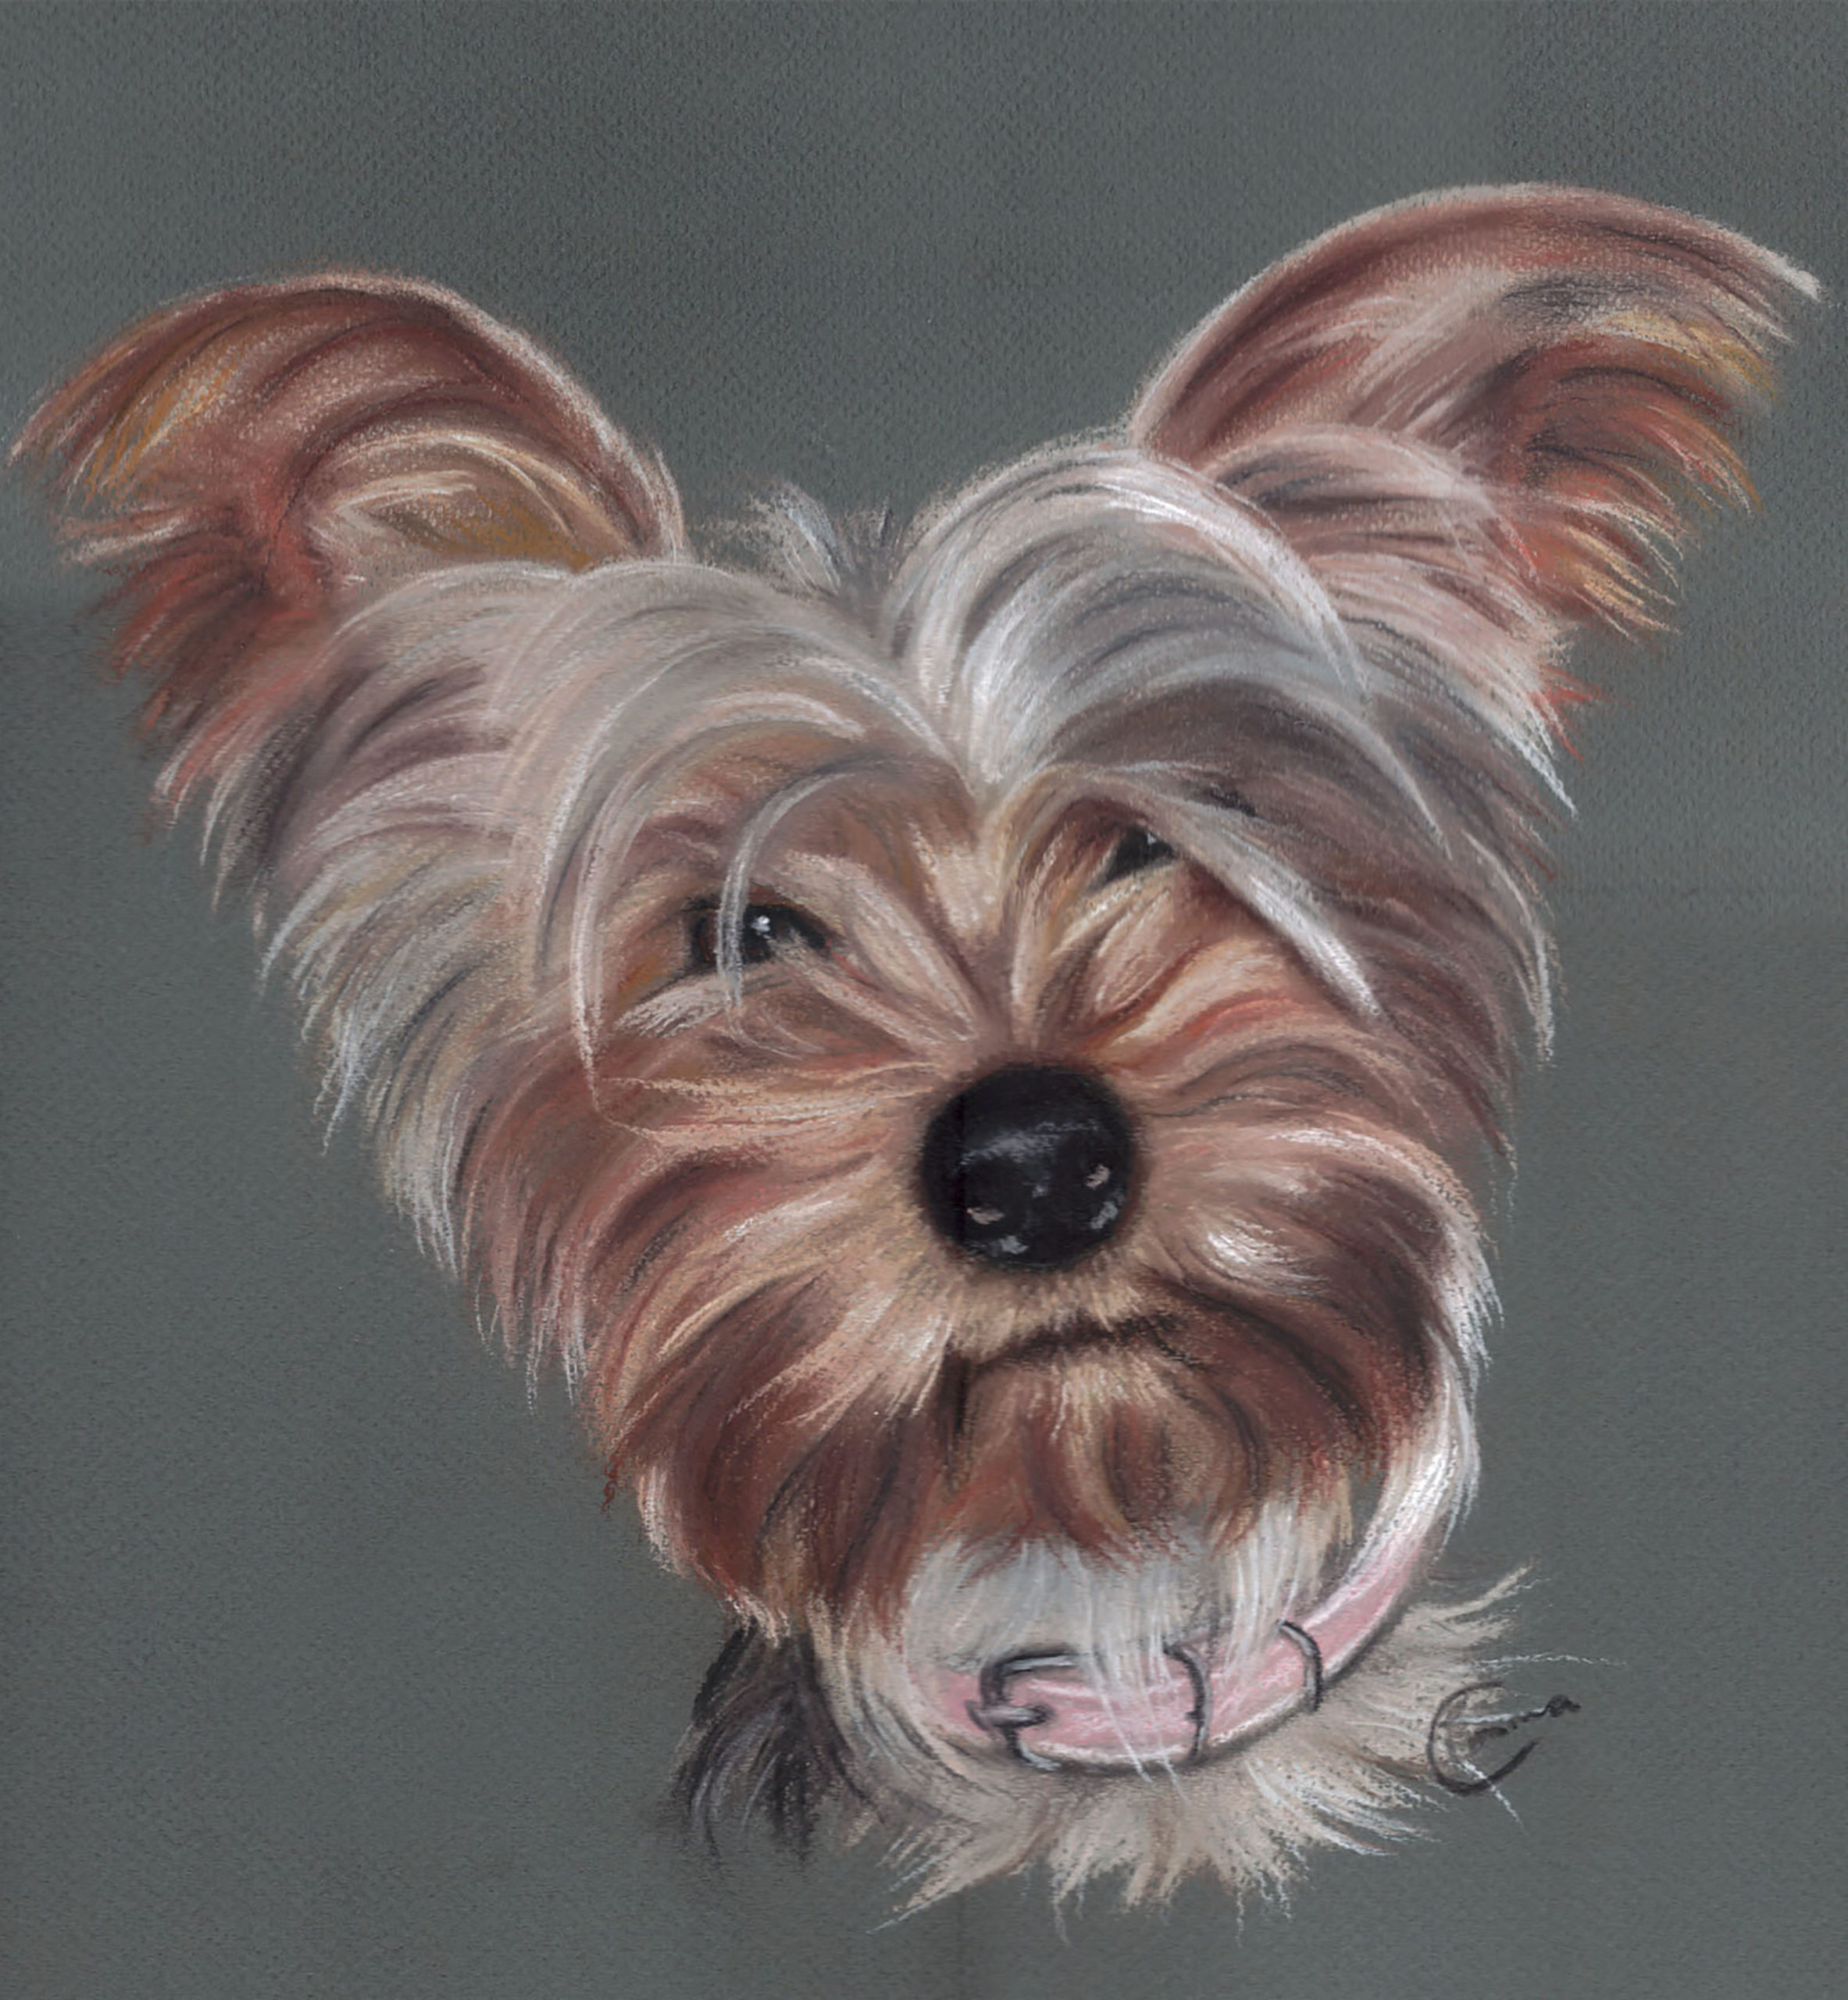 Emma Colbert, Early dog portrait, cheap pastels on Ingres paper, 12 x 12 in